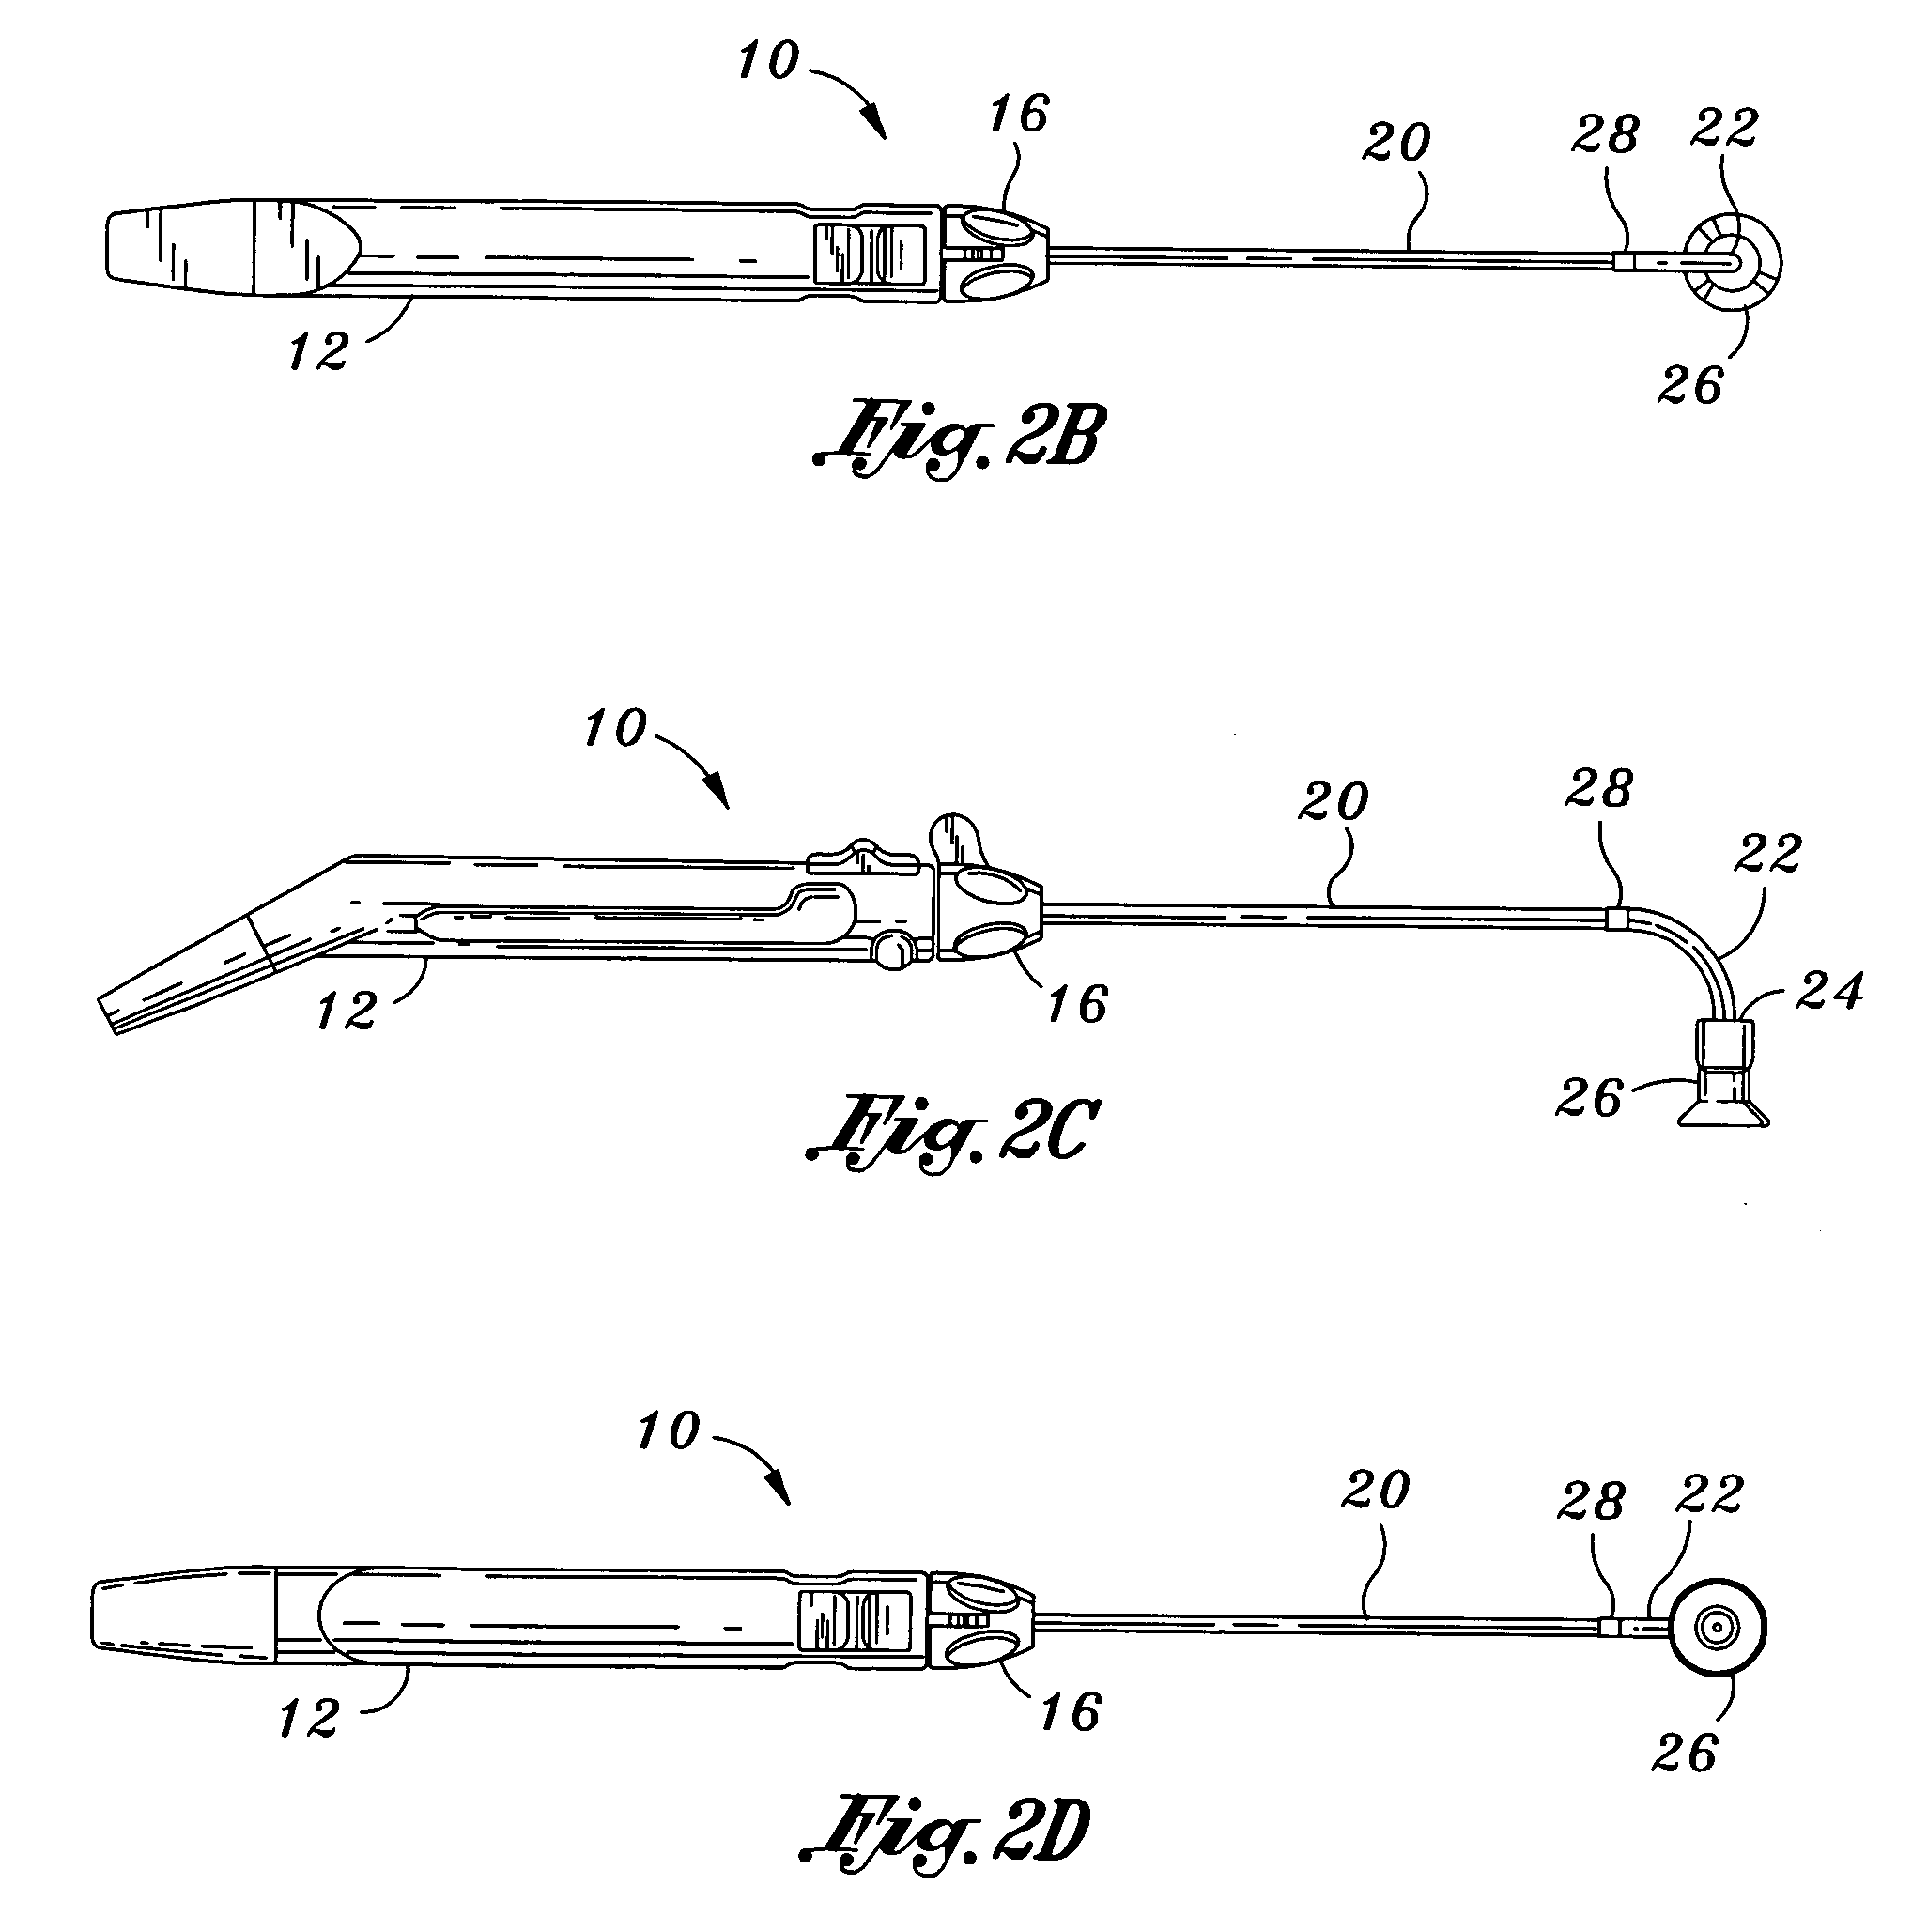 Surgical apparatus having configurable portions